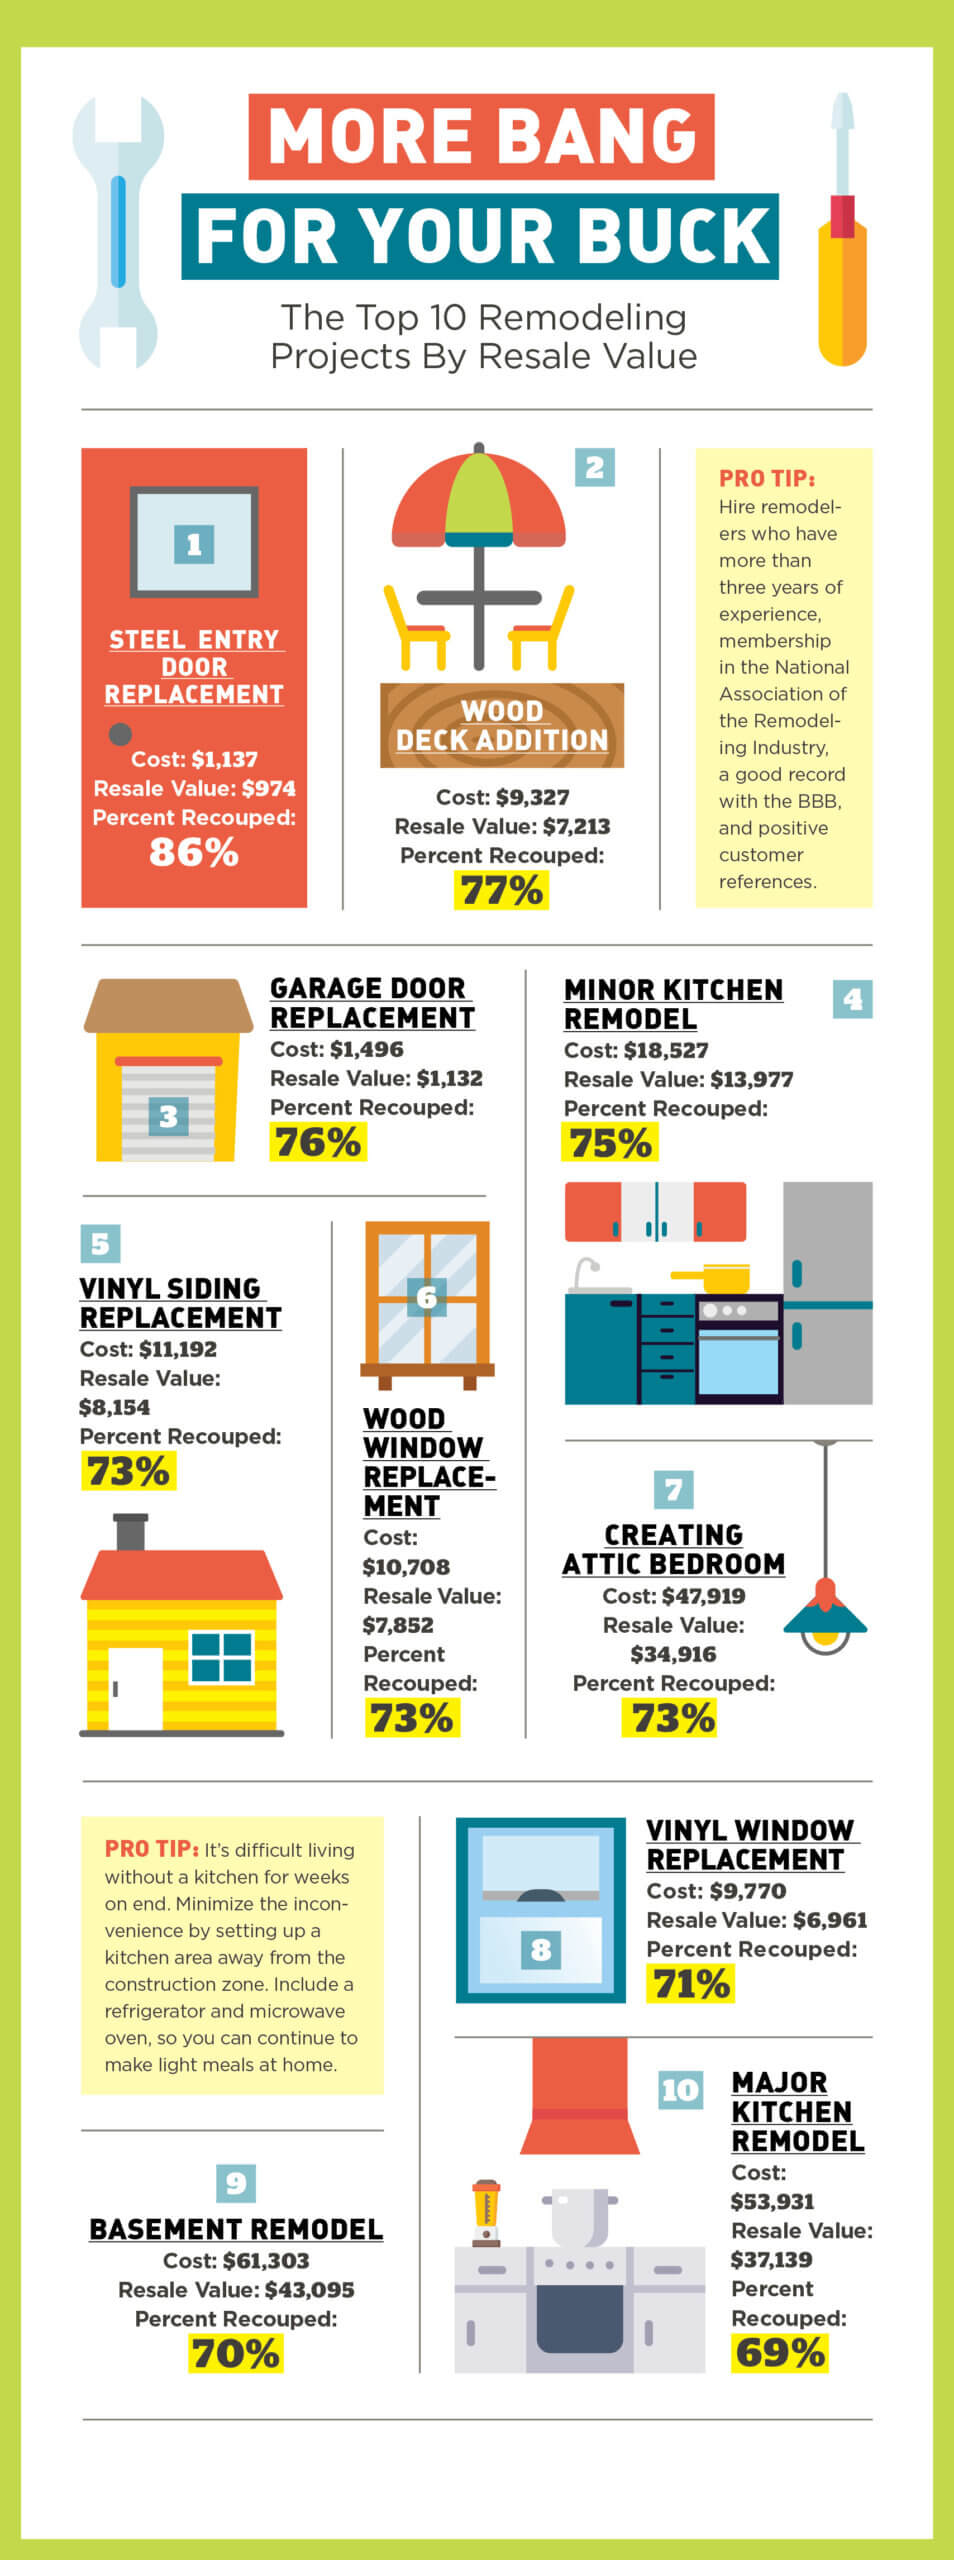 [Infographic] The Top 10 Remodeling Projects By Resale Value